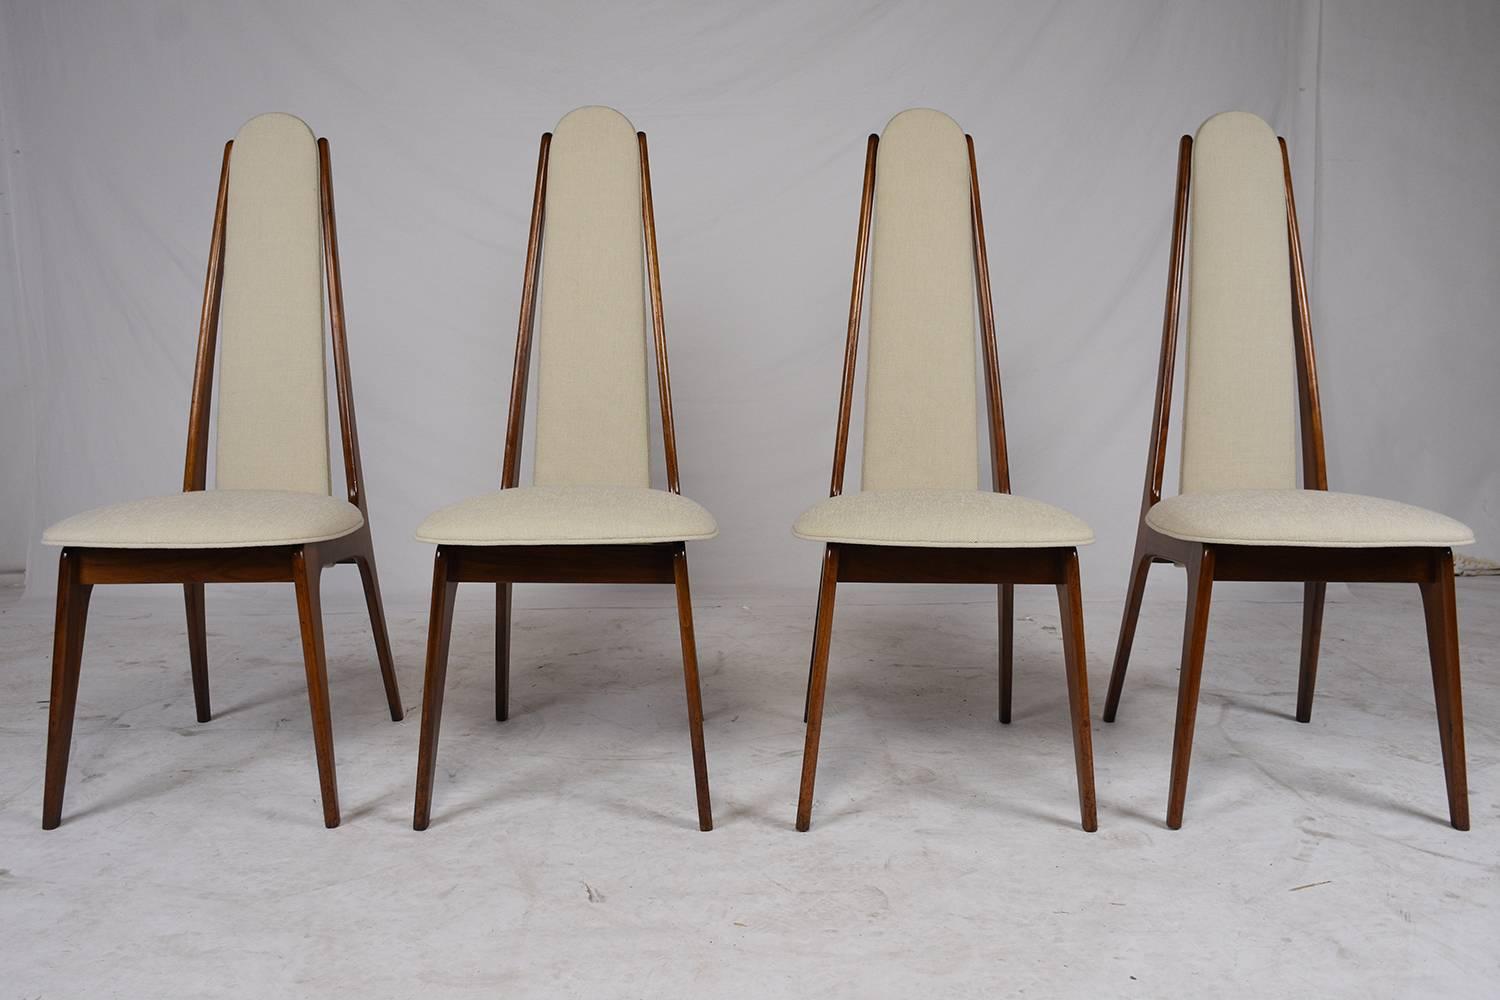 This 1960s Mid-Century Modern-style set of eight dining chairs are made in the manner of Adrian Pearsall and are very unique. With a slim profile the walnut frames have a slight curve and are very sturdy. The cushions have recently been